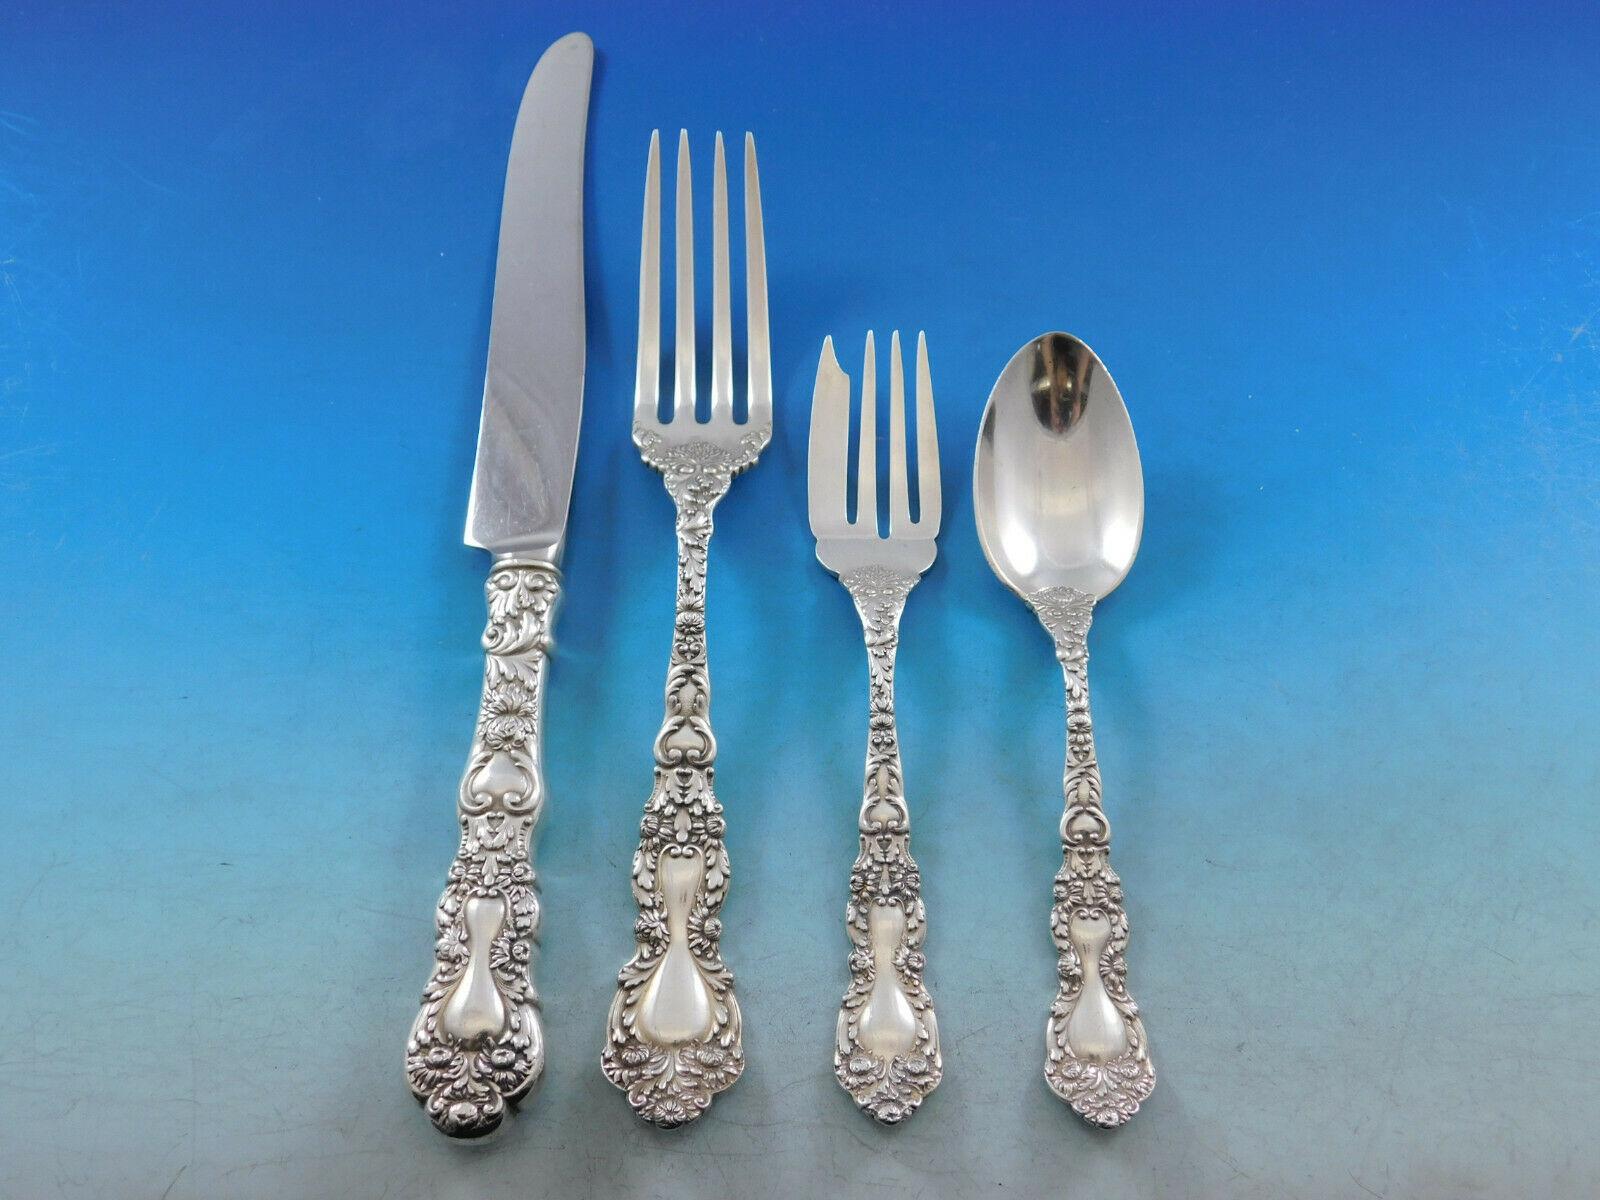 Dinner Size Imperial Chrysanthemum by Gorham sterling silver Flatware set, 67 pieces. This pattern was designed by William Codman for Gorham and was introduced in the year 1894. This service includes:

12 Dinner Size Knives w/French stainless